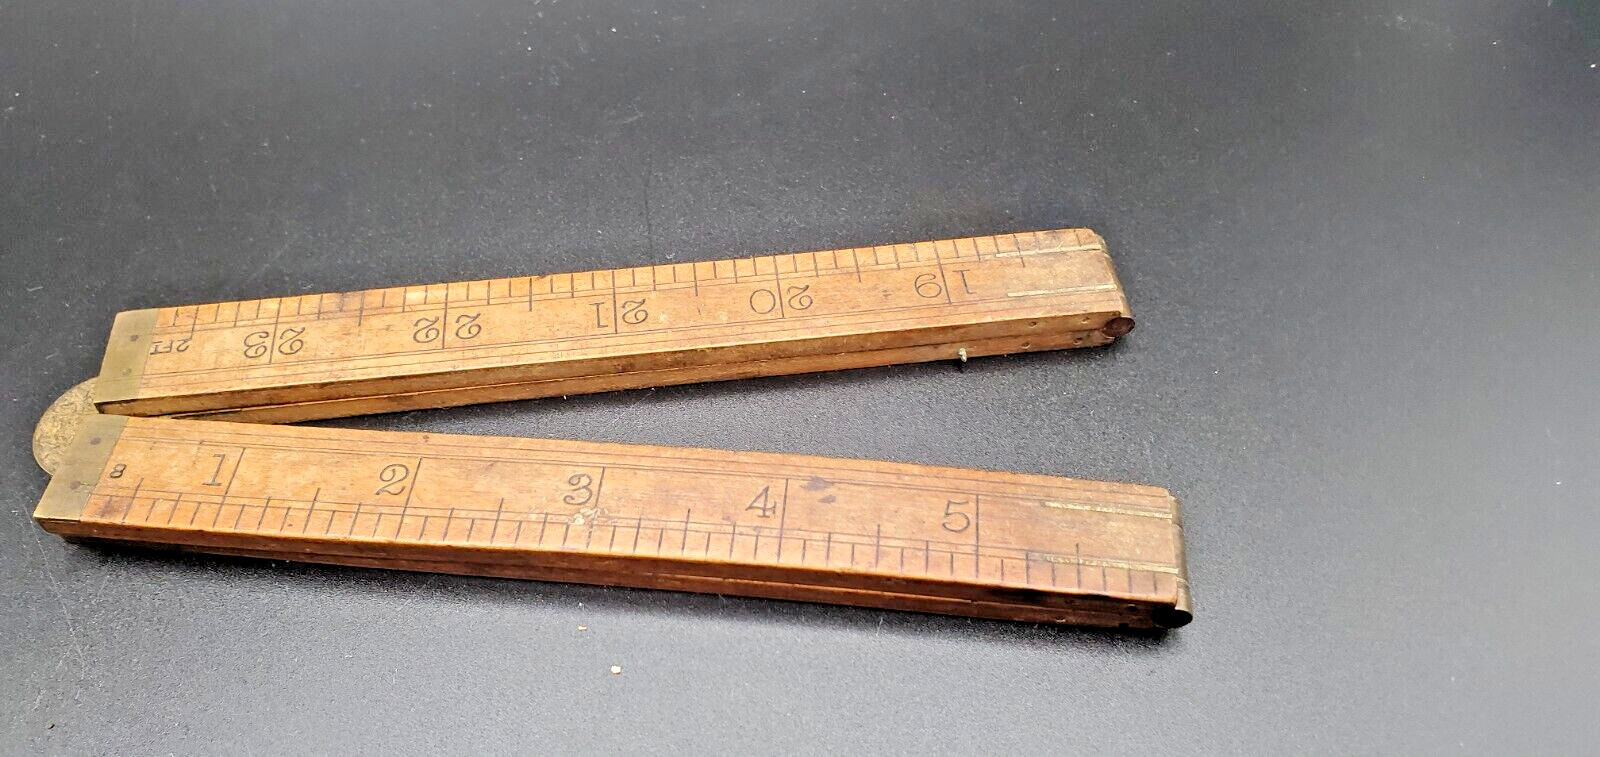 Folding Ruler, Hockley Abbey Vintage- Made in England, # 1163